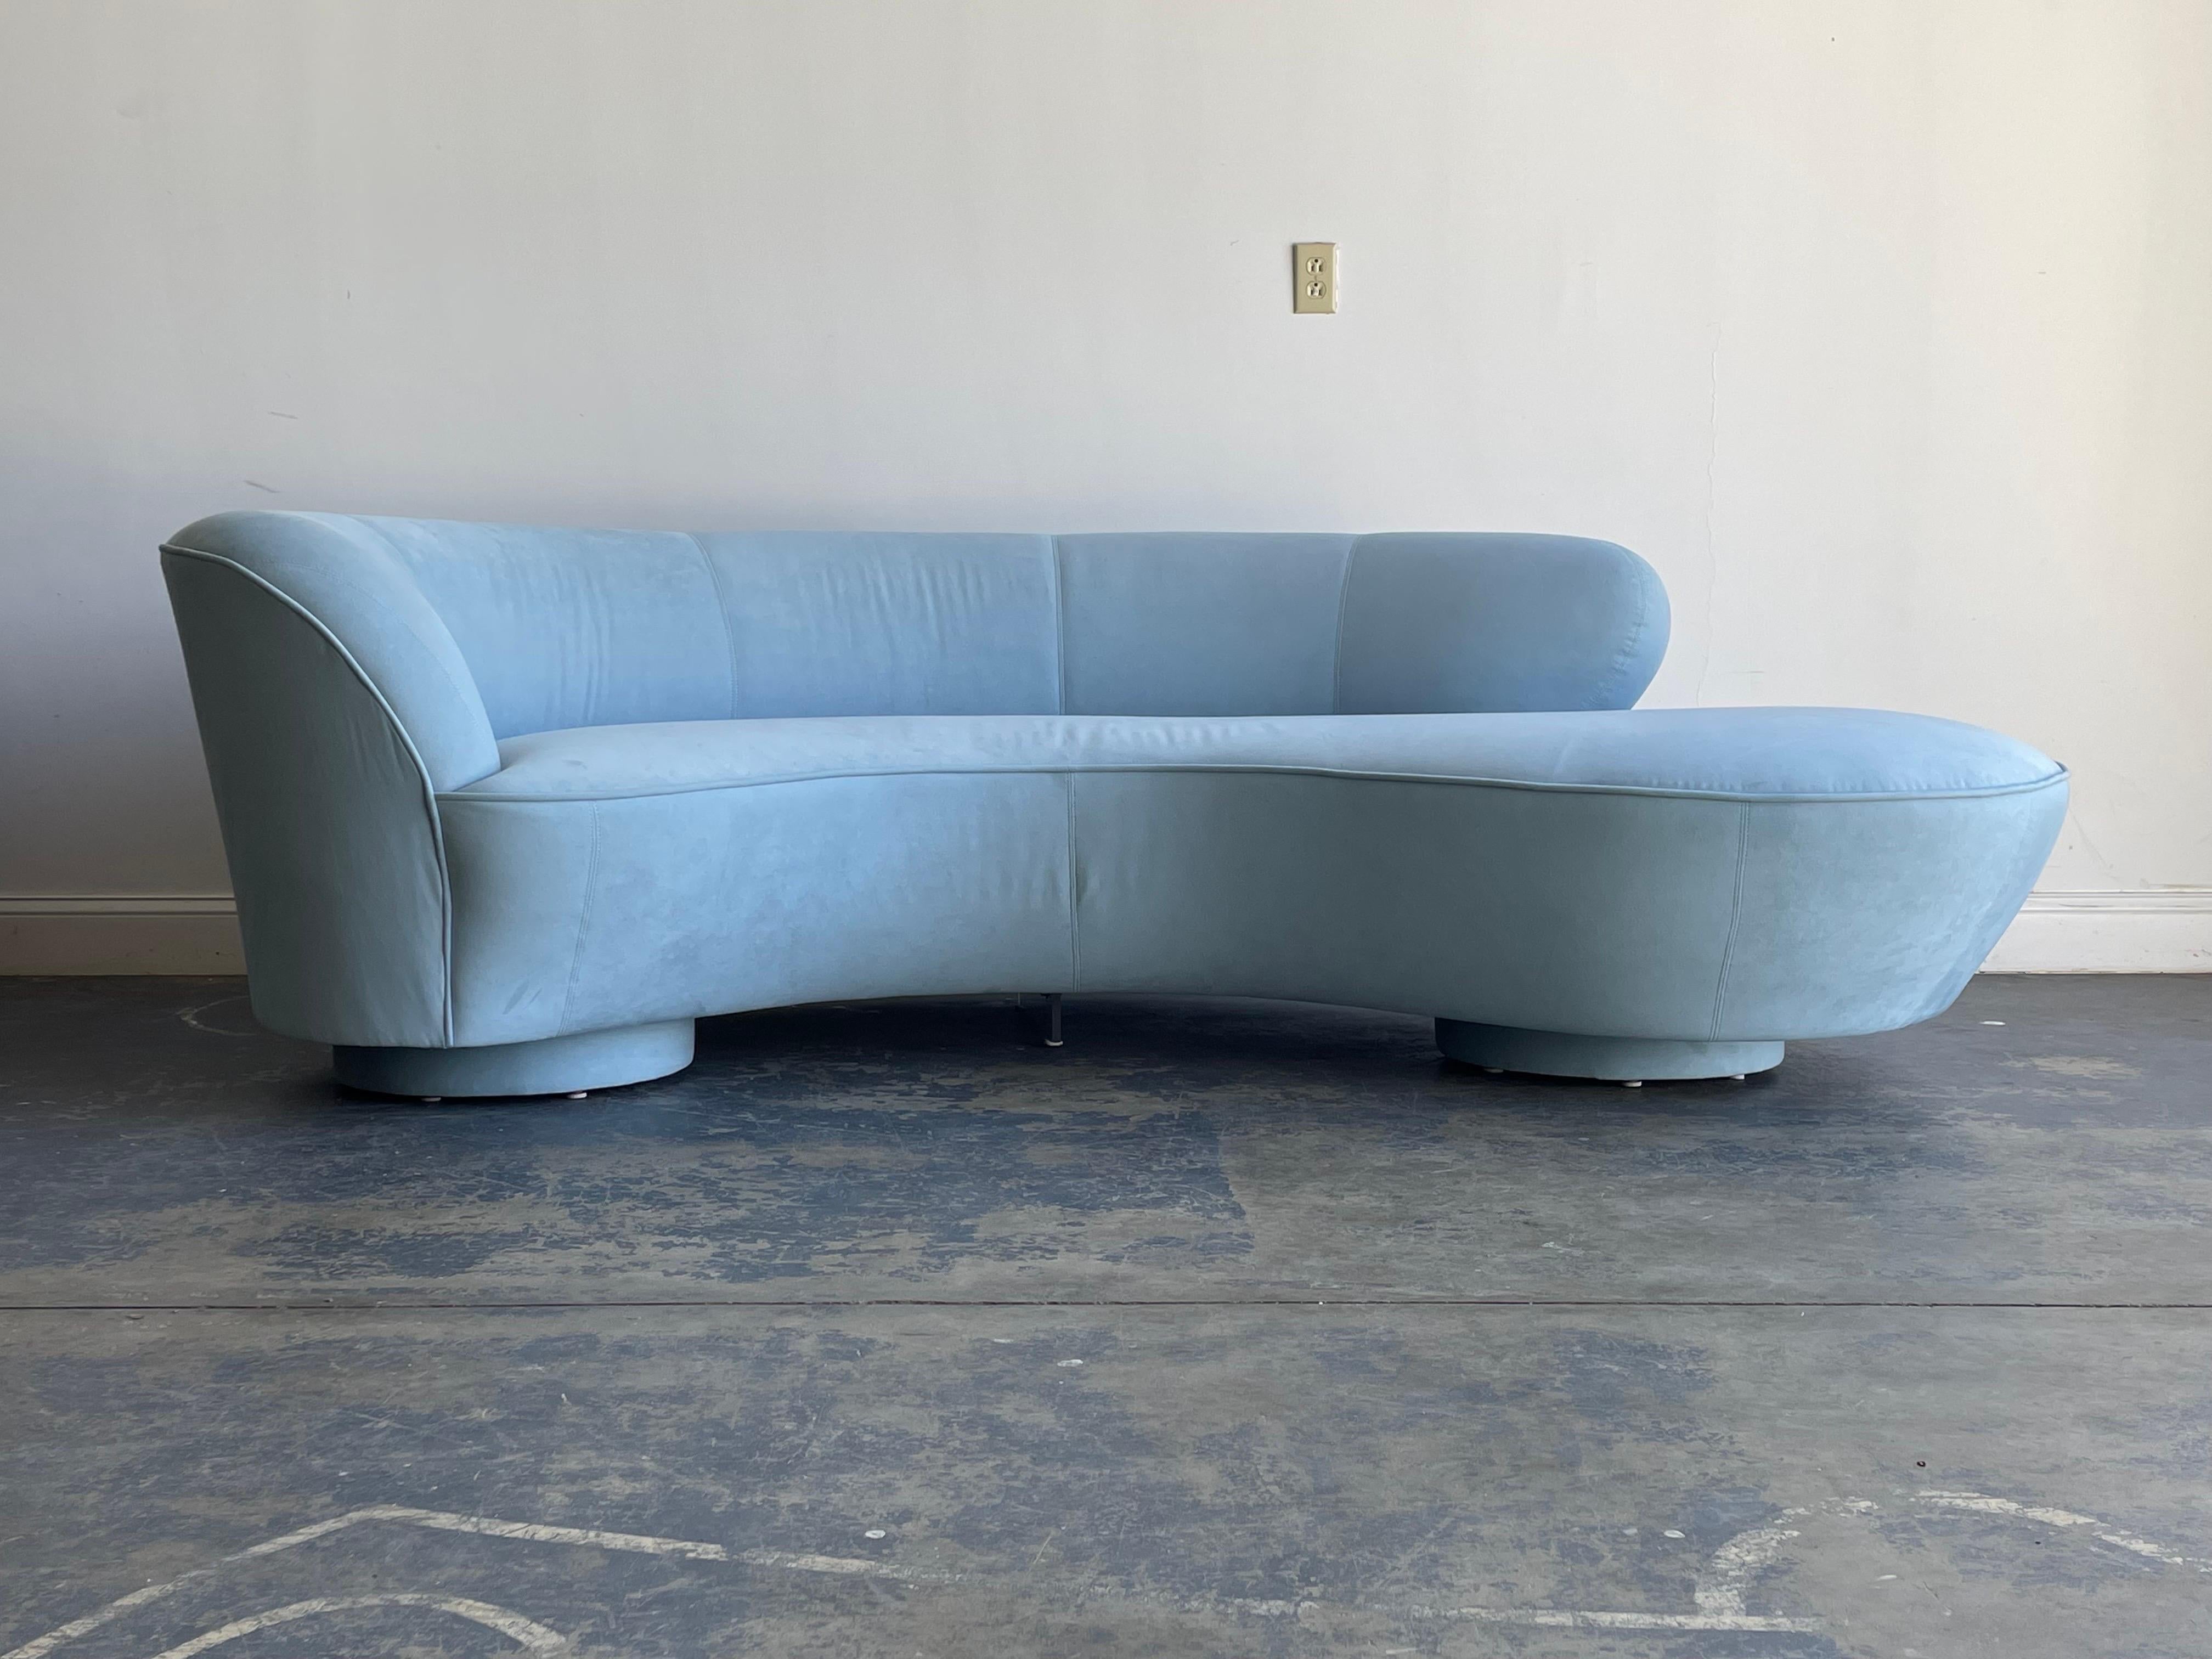 American Pair of Opposing Complimentary Vladimir Kagan Serpentine Sofas for Directional